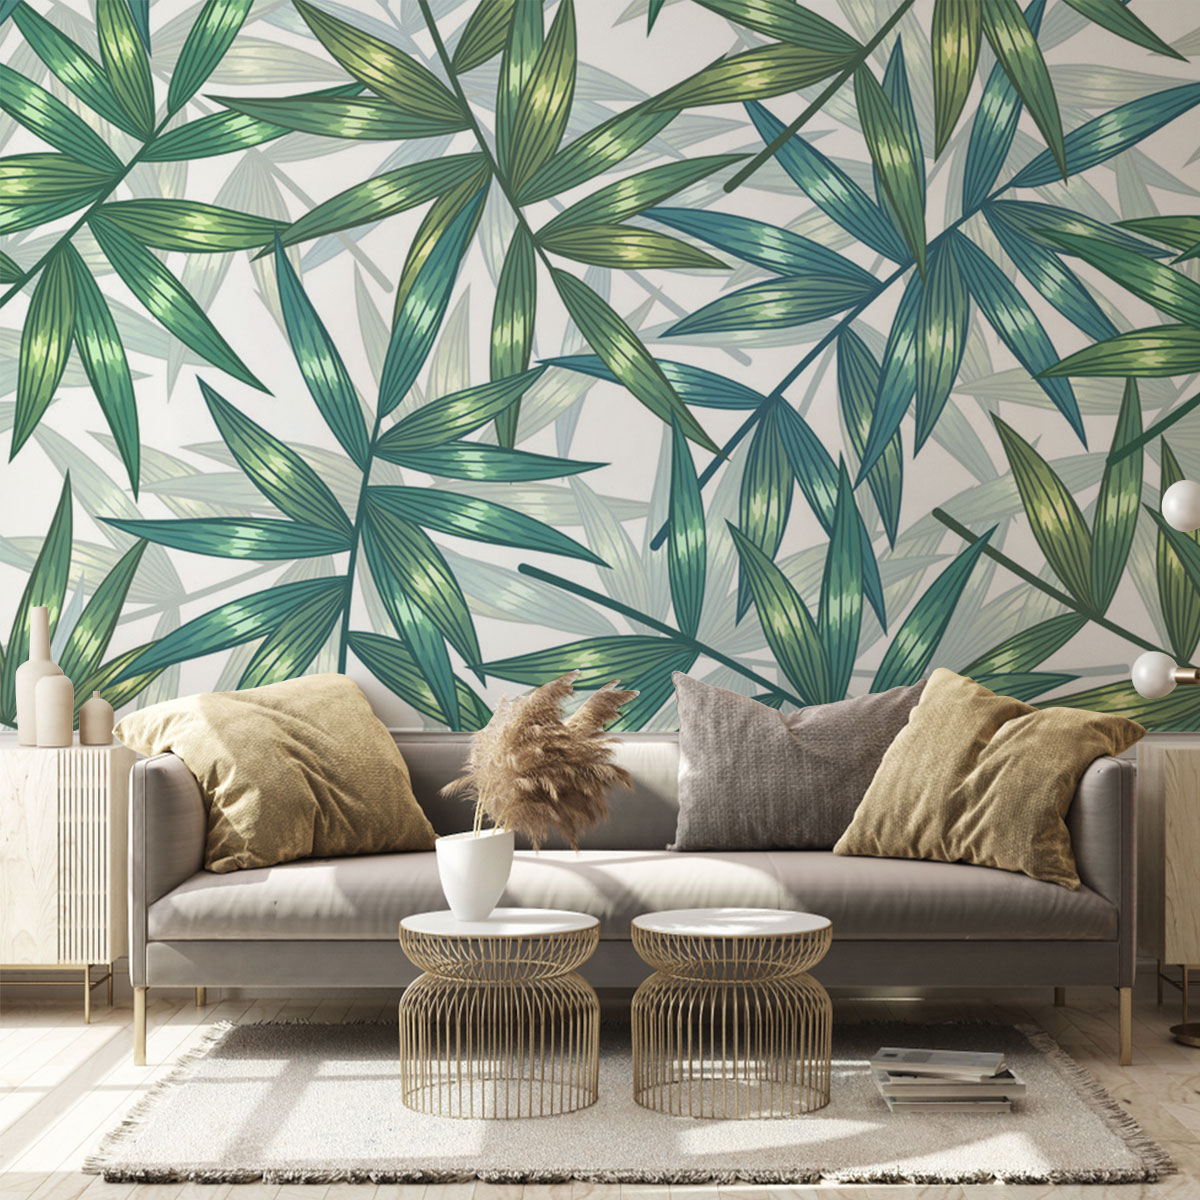 Green Gold Bamboo Leaves Wall Mural